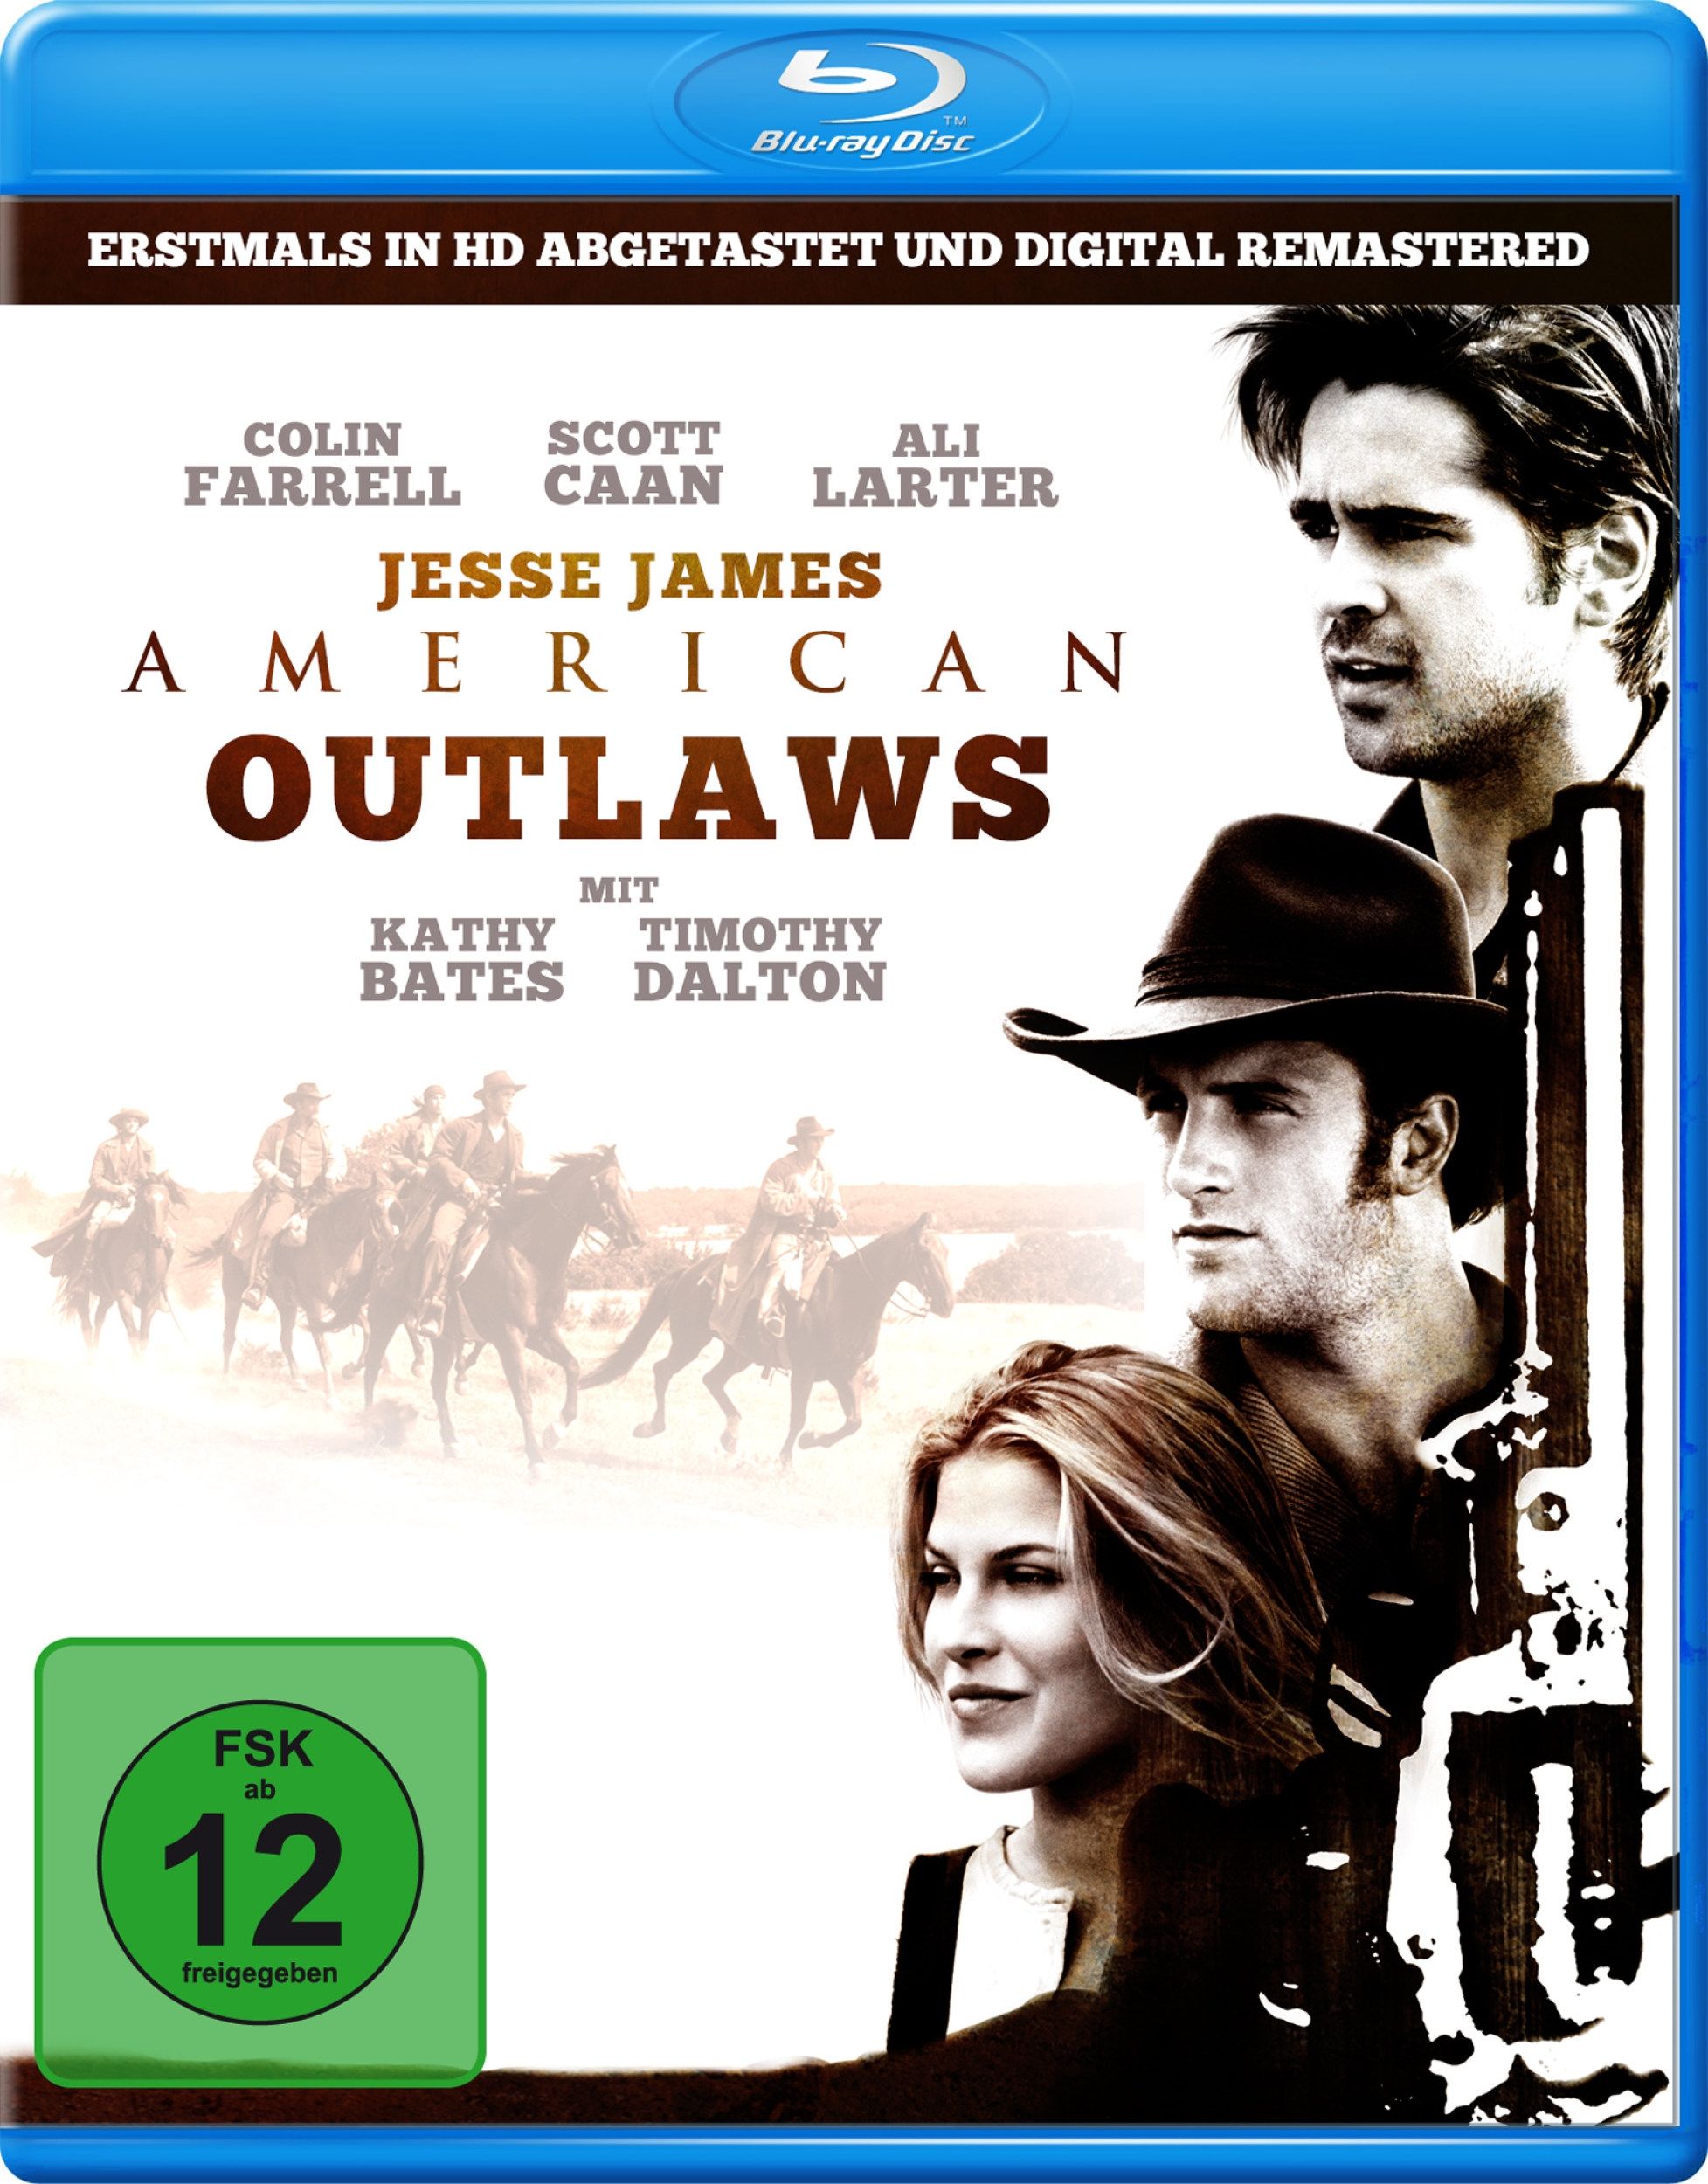 American Outlaws - Jesse James (Uncut) (BLURAY)